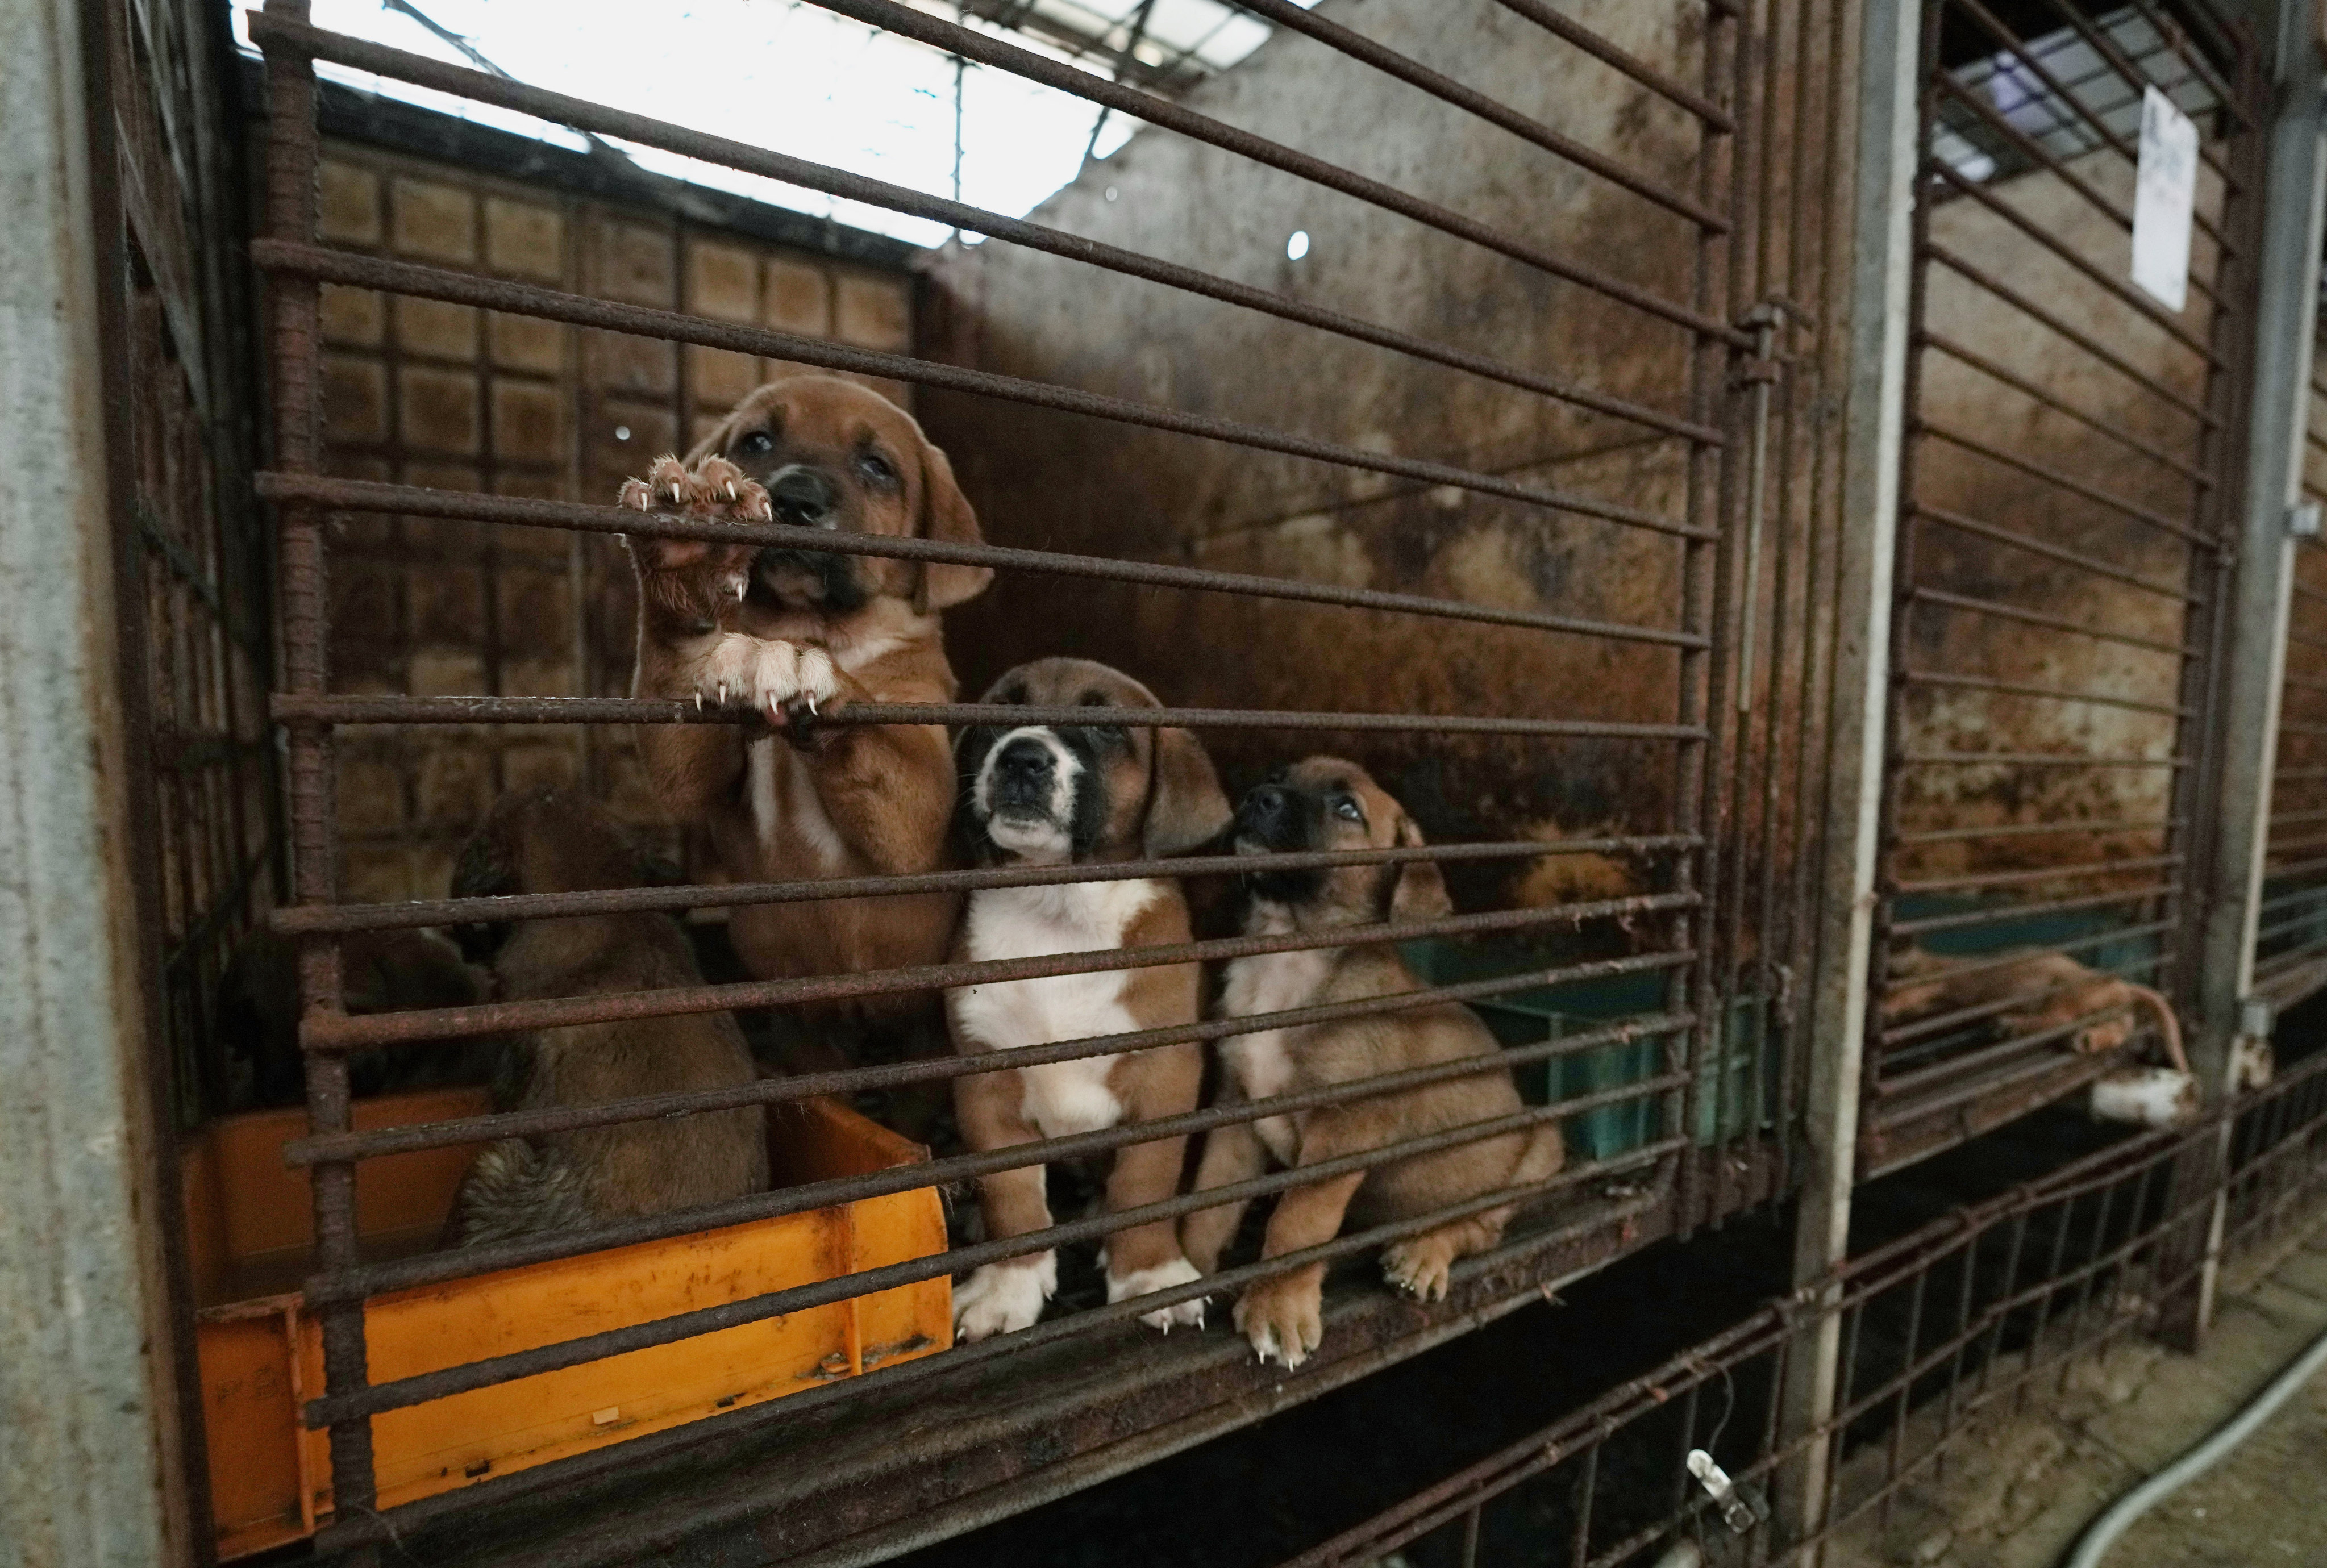 A dog farm in Pyeongtaek. In a rare display of unity, South Korea’s ruling and opposition parties are collaborating on laws to ban dog meat consumption. Photo: AP